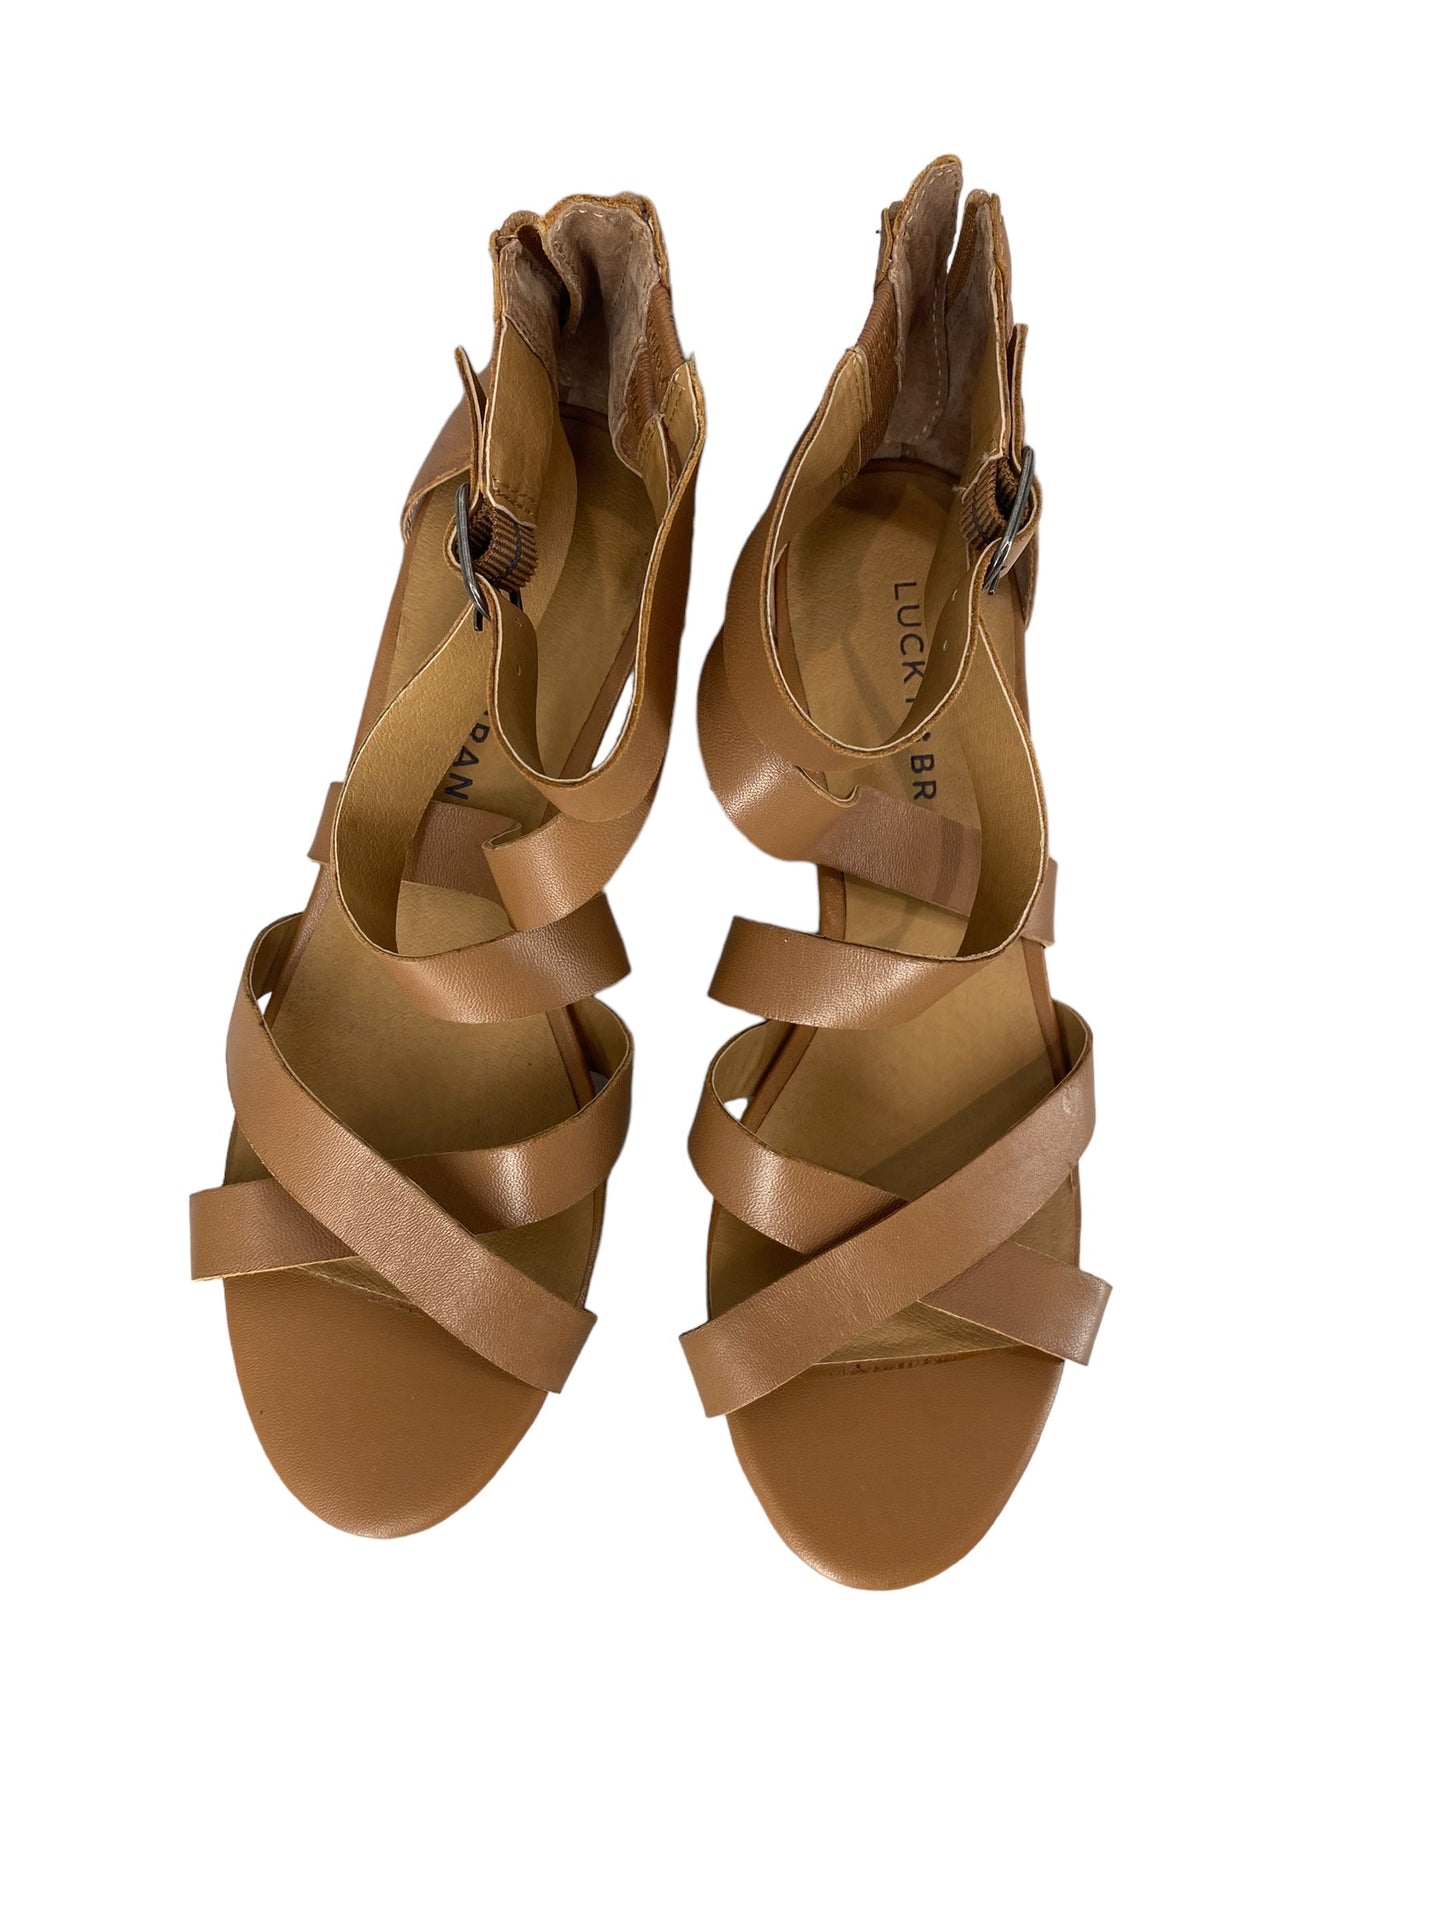 Sandals Heels Block By Lucky Brand  Size: 6